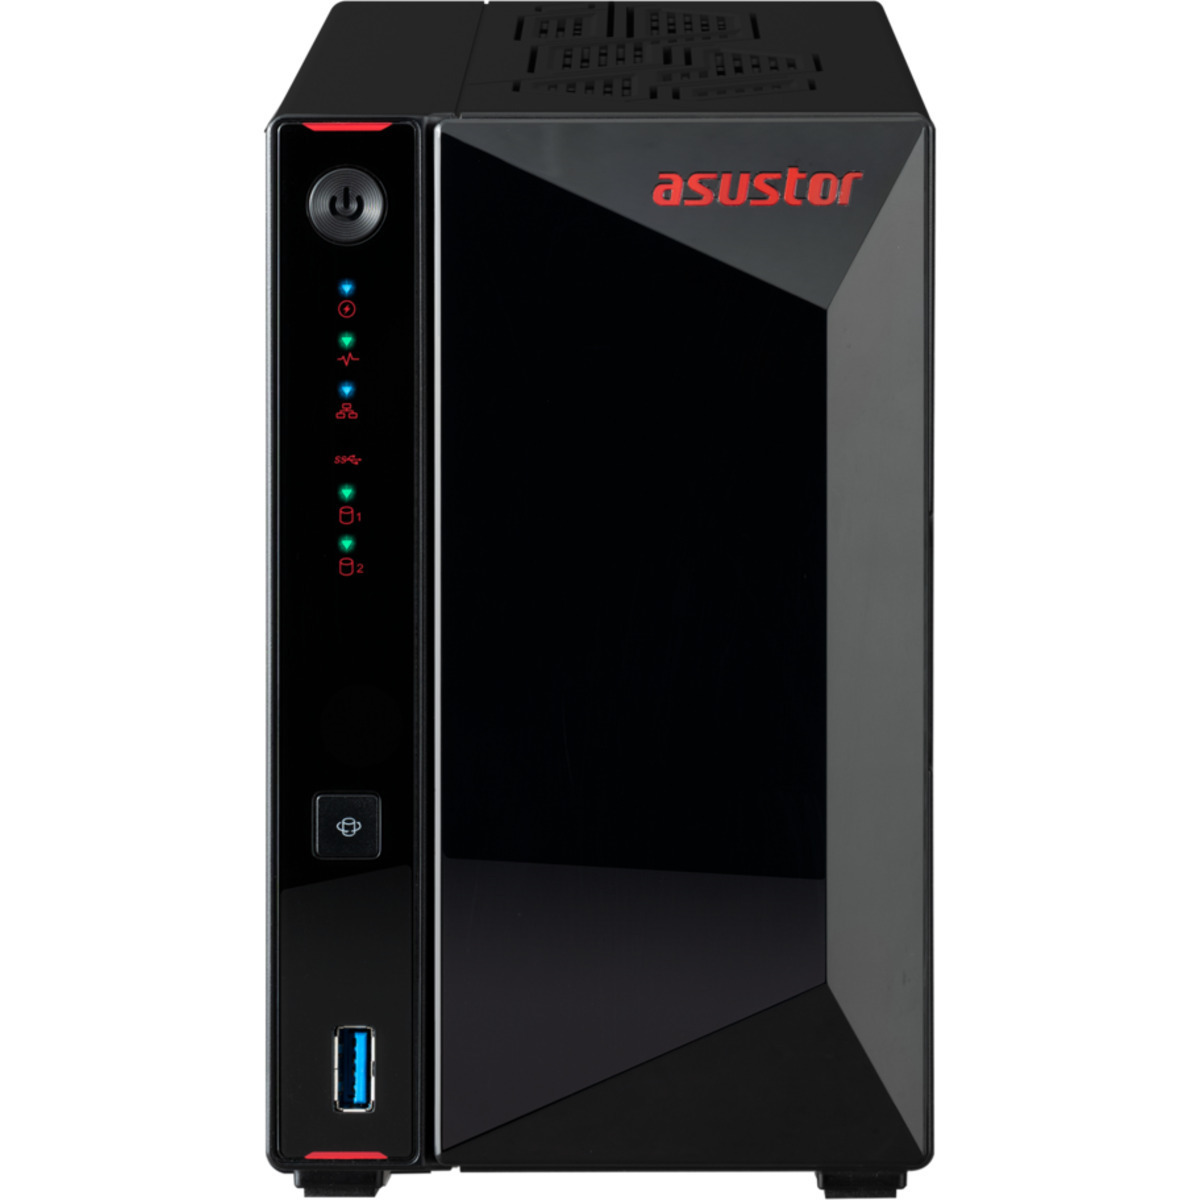 buy ASUSTOR Nimbustor 2 Gen2 AS5402T 16tb Desktop NAS - Network Attached Storage Device 2x8000gb Western Digital Gold WD8004FRYZ 3.5 7200rpm SATA 6Gb/s HDD ENTERPRISE Class Drives Installed - Burn-In Tested - FREE RAM UPGRADE - nas headquarters buy network attached storage server device das new raid-5 free shipping simply usa christmas holiday black friday cyber monday week sale happening now! Nimbustor 2 Gen2 AS5402T